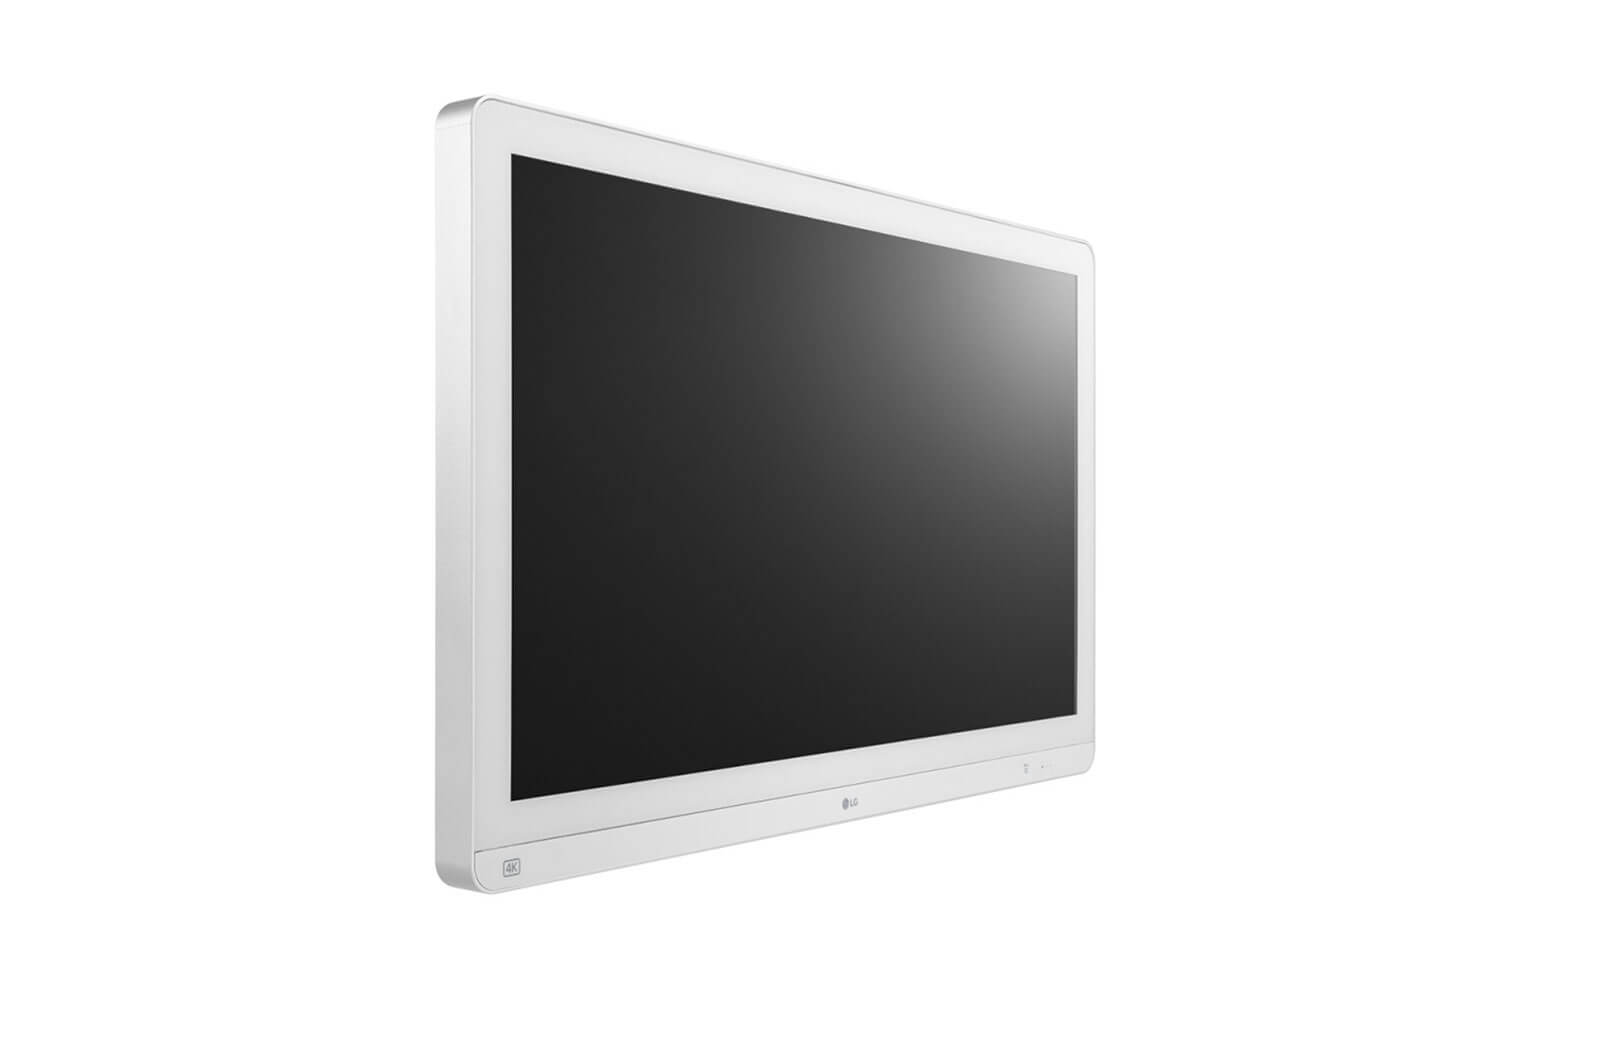 Medical monitor LG 32HL710S-W 31.5" 4K LED Surgical Display is dustproof and water resistant 